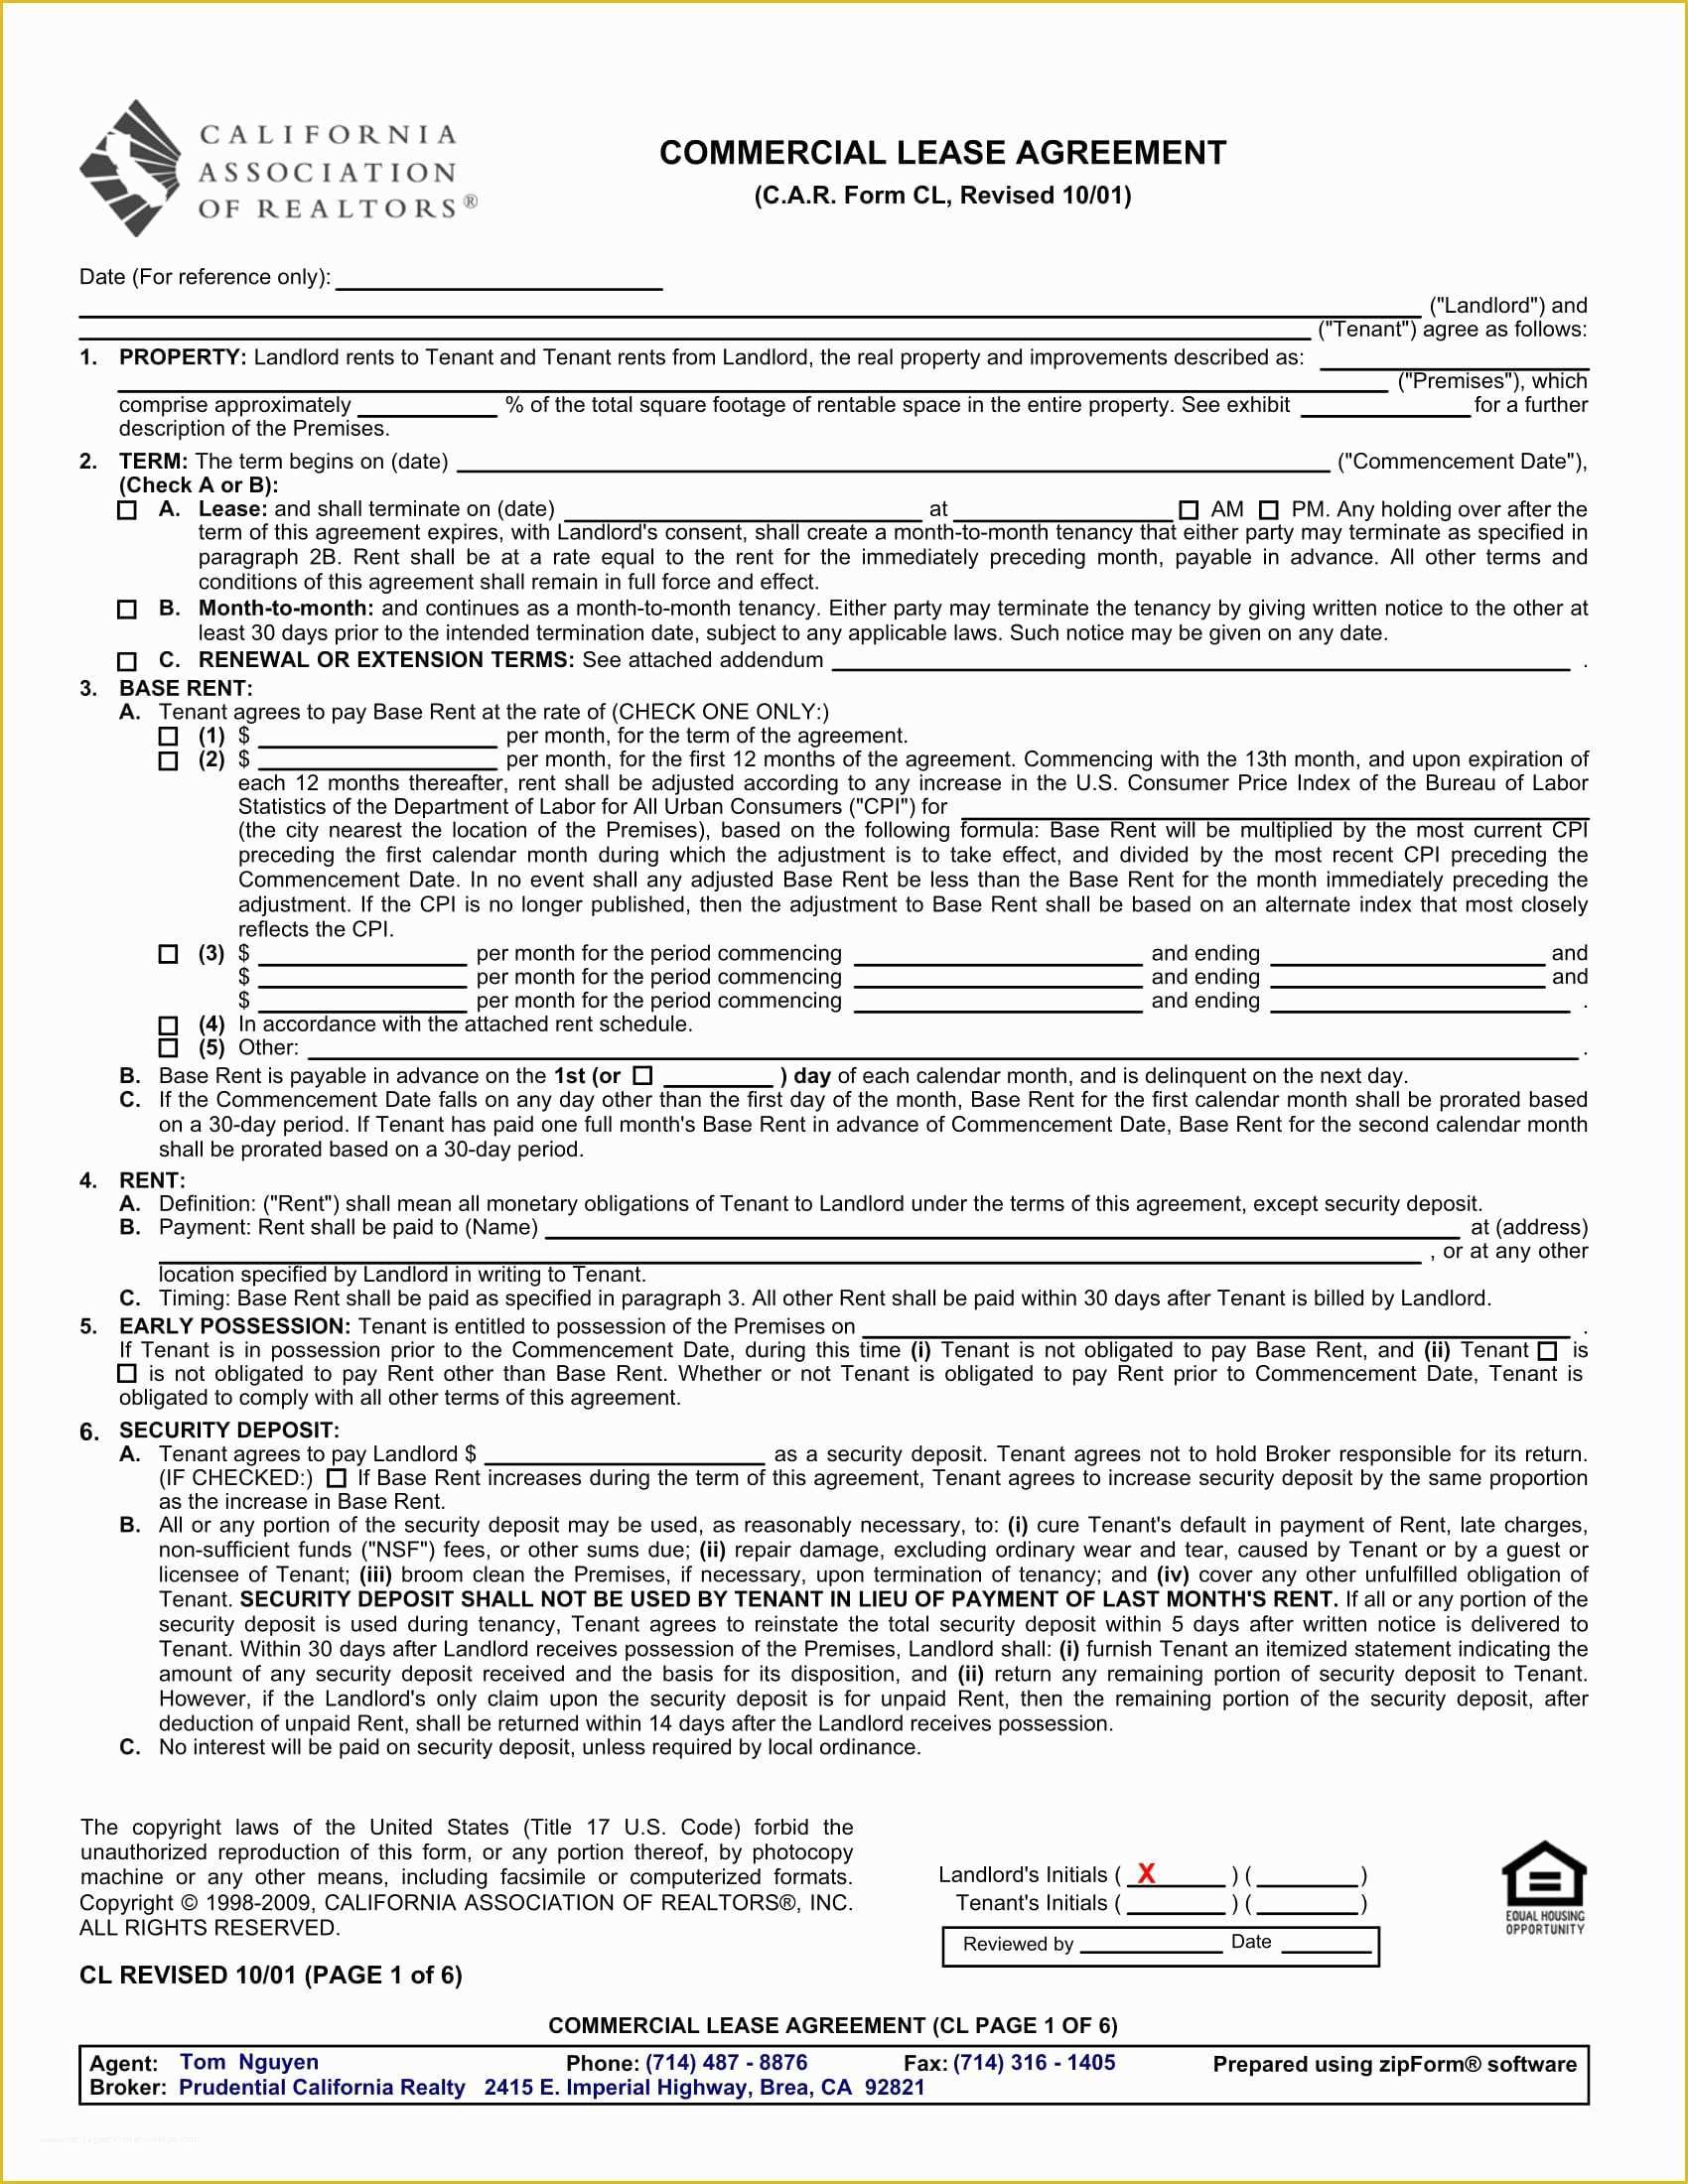 Free Commercial Lease Agreement Template Download Of 15 Business forms for Car Dealers and Other Vehicle